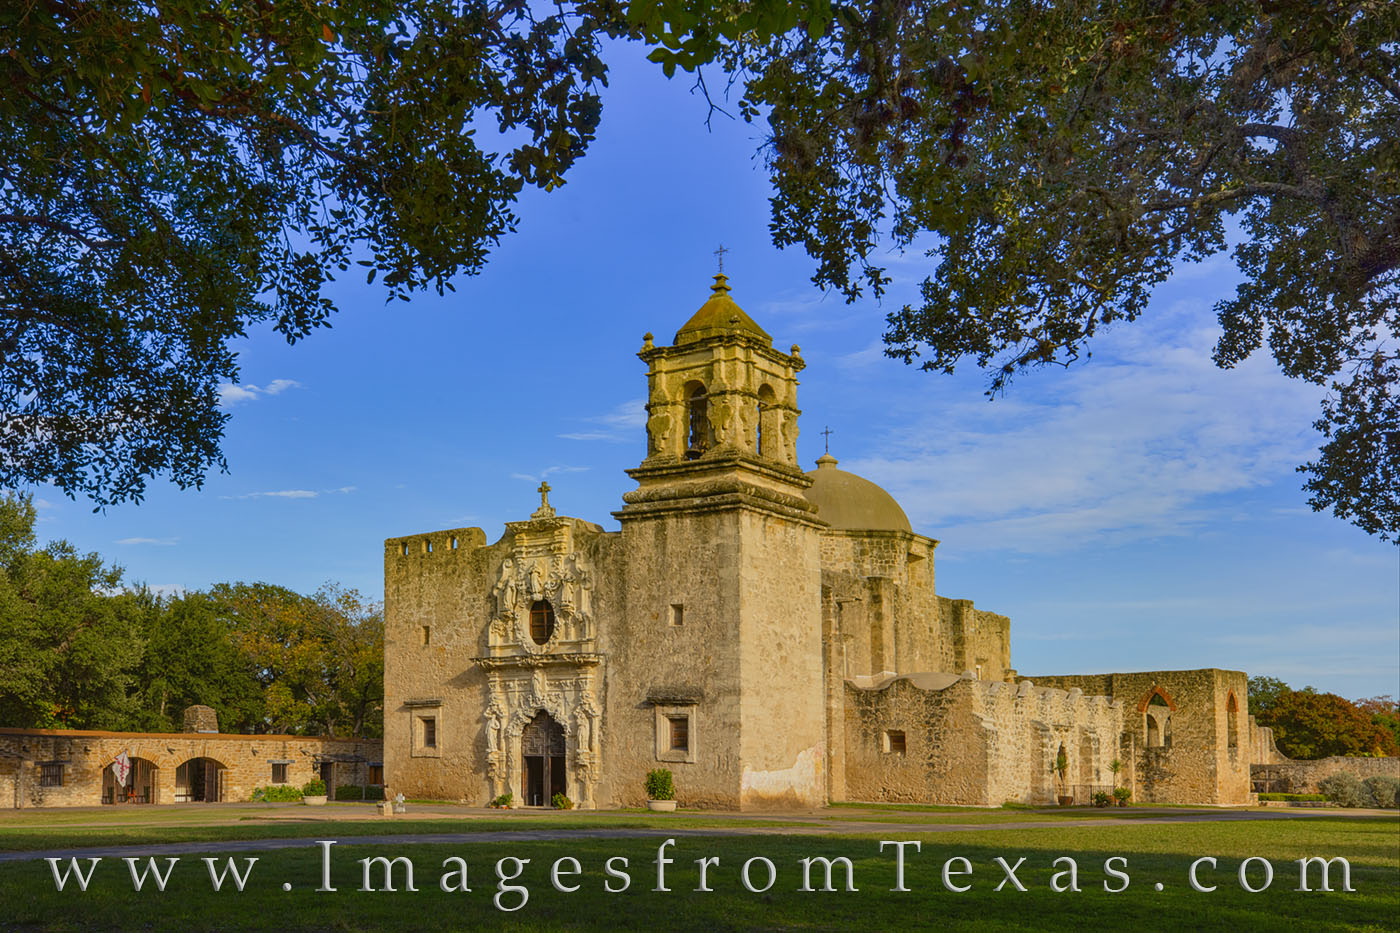 Named after Saint Joseph and the Marqués de San Miguel de Aguayo, the Mission San Jose was founded in 1720 along the banks of...